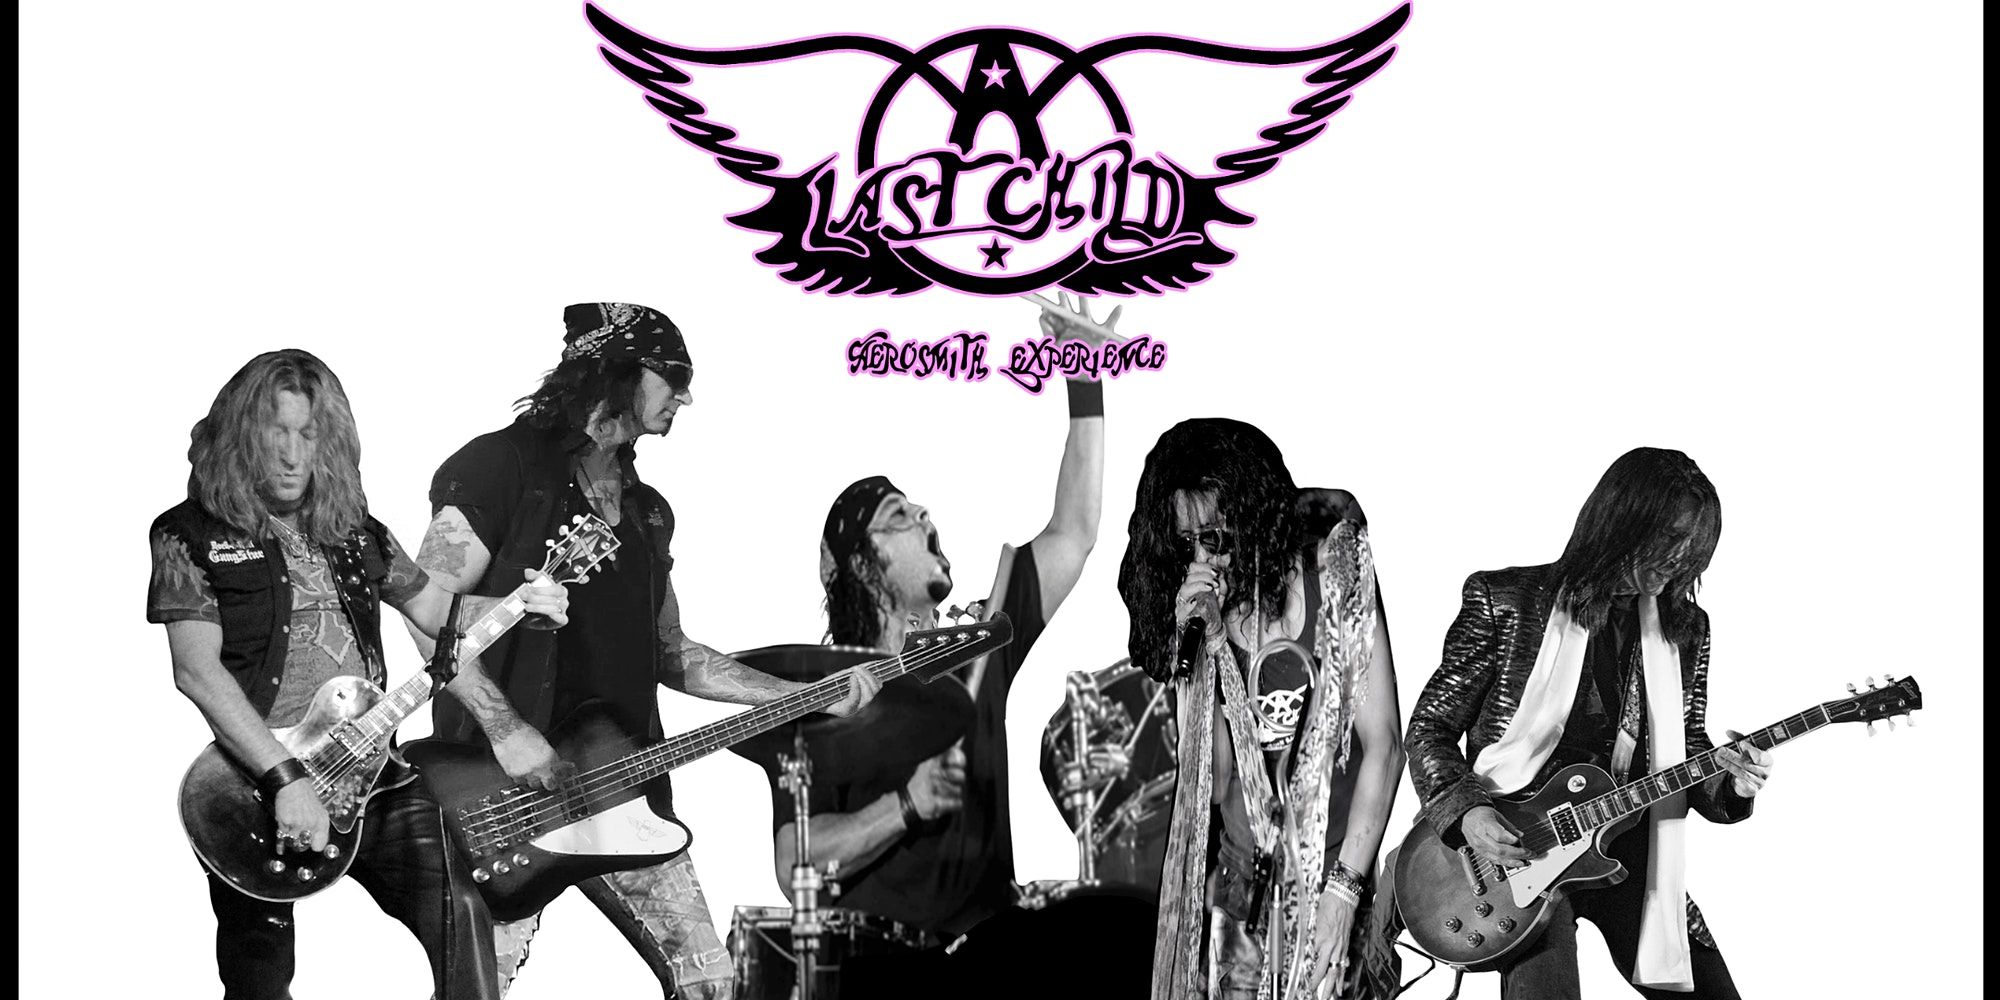 Last Child (Aerosmith Experience) LIVE at The Tin Pan promotional image